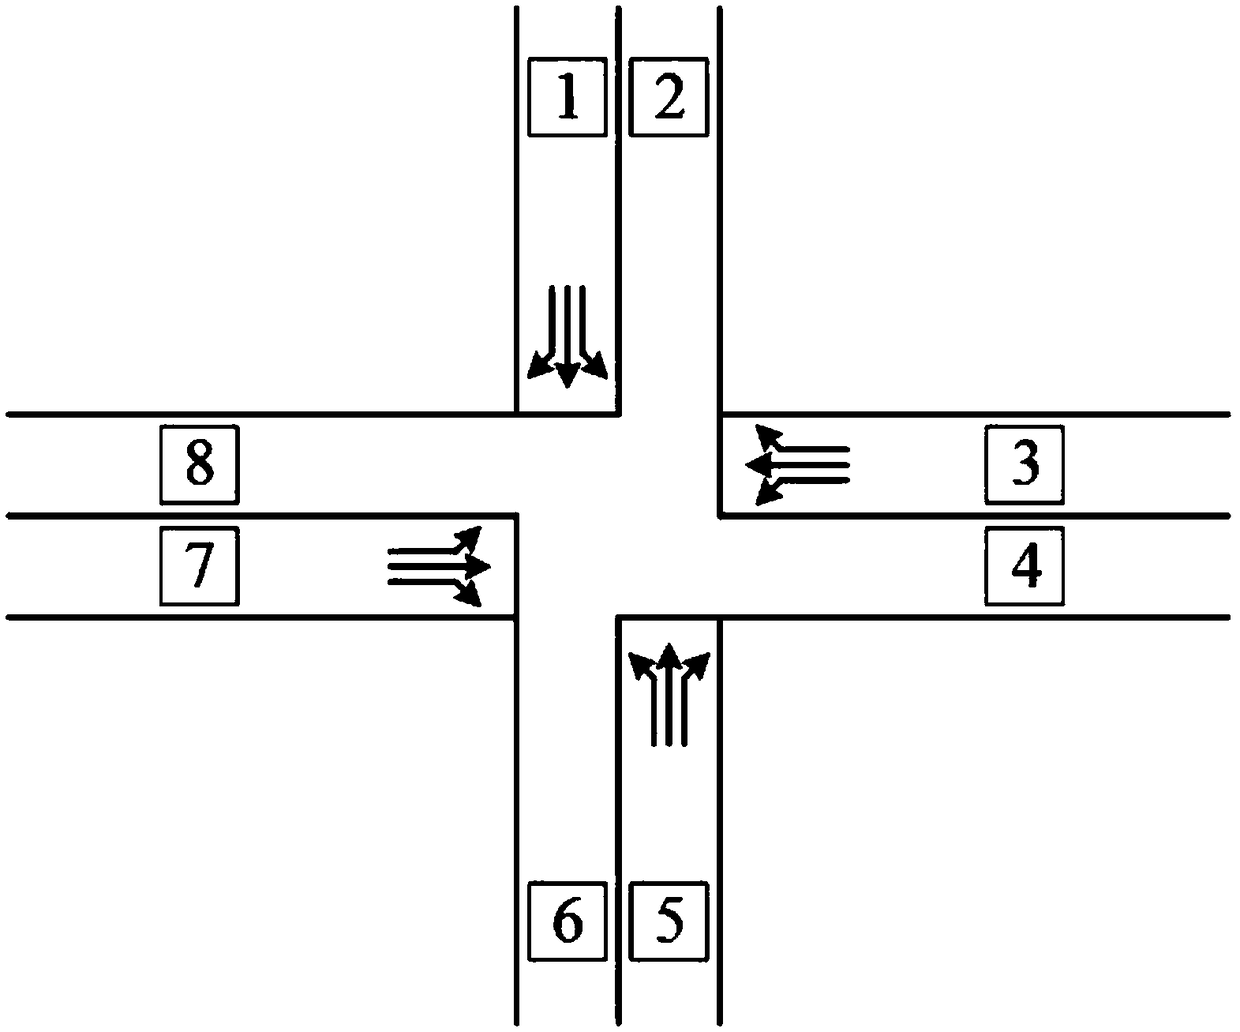 Regional traffic signal control effect evaluation method based on weighted complex network